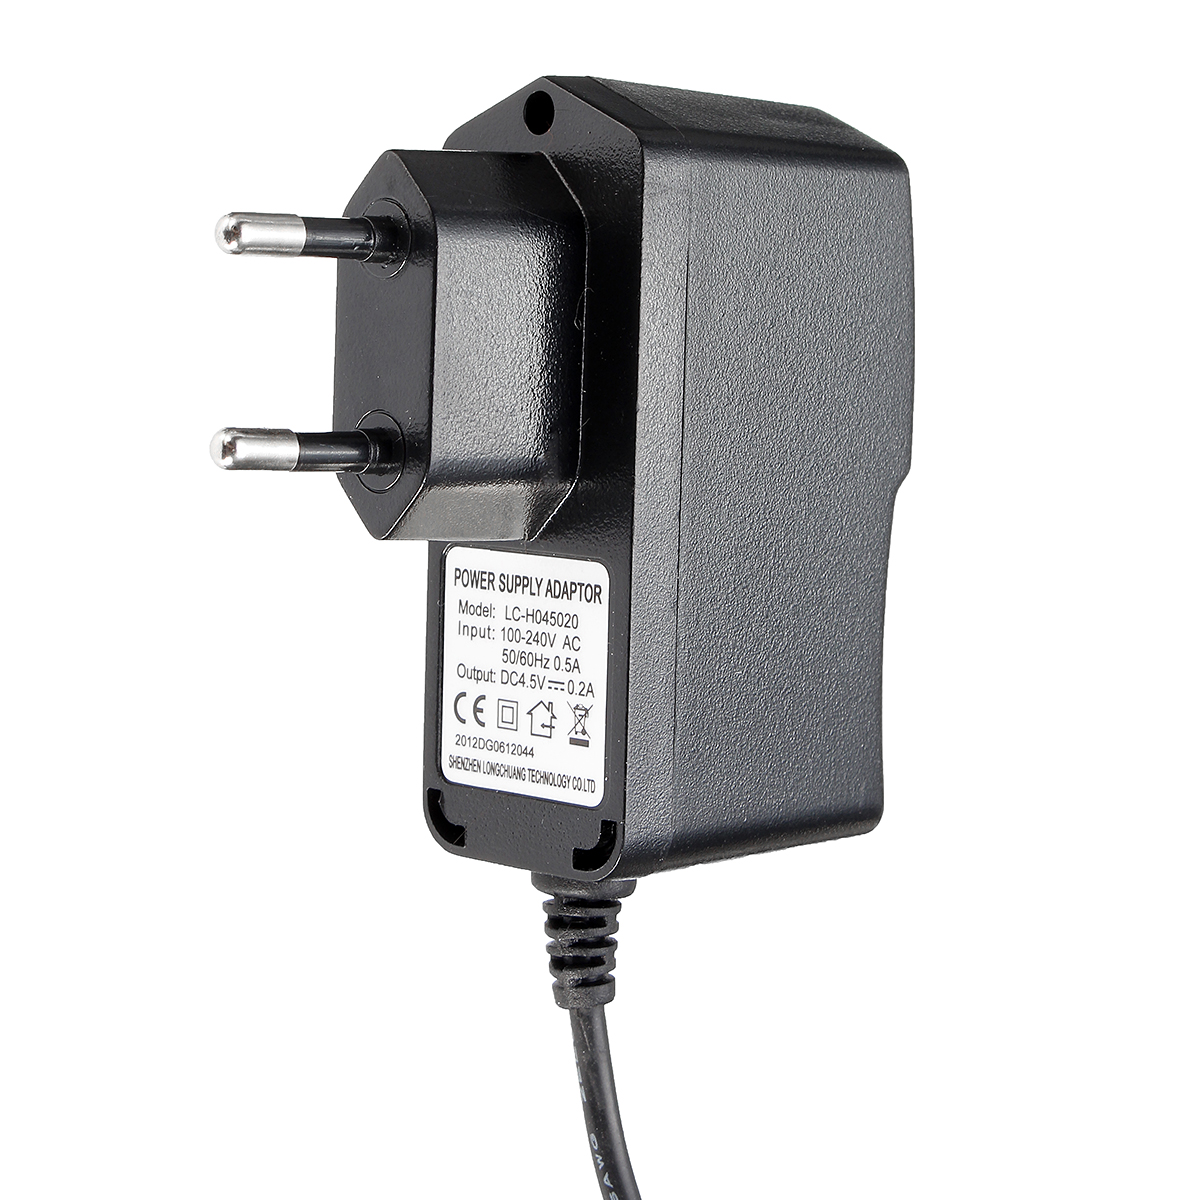 AC-100-V-240V-DC-45V-02-Adapter-USEU-Plug-Power-Supply-Charger-For-Wireless-Weather-Station-Clock-1389379-7